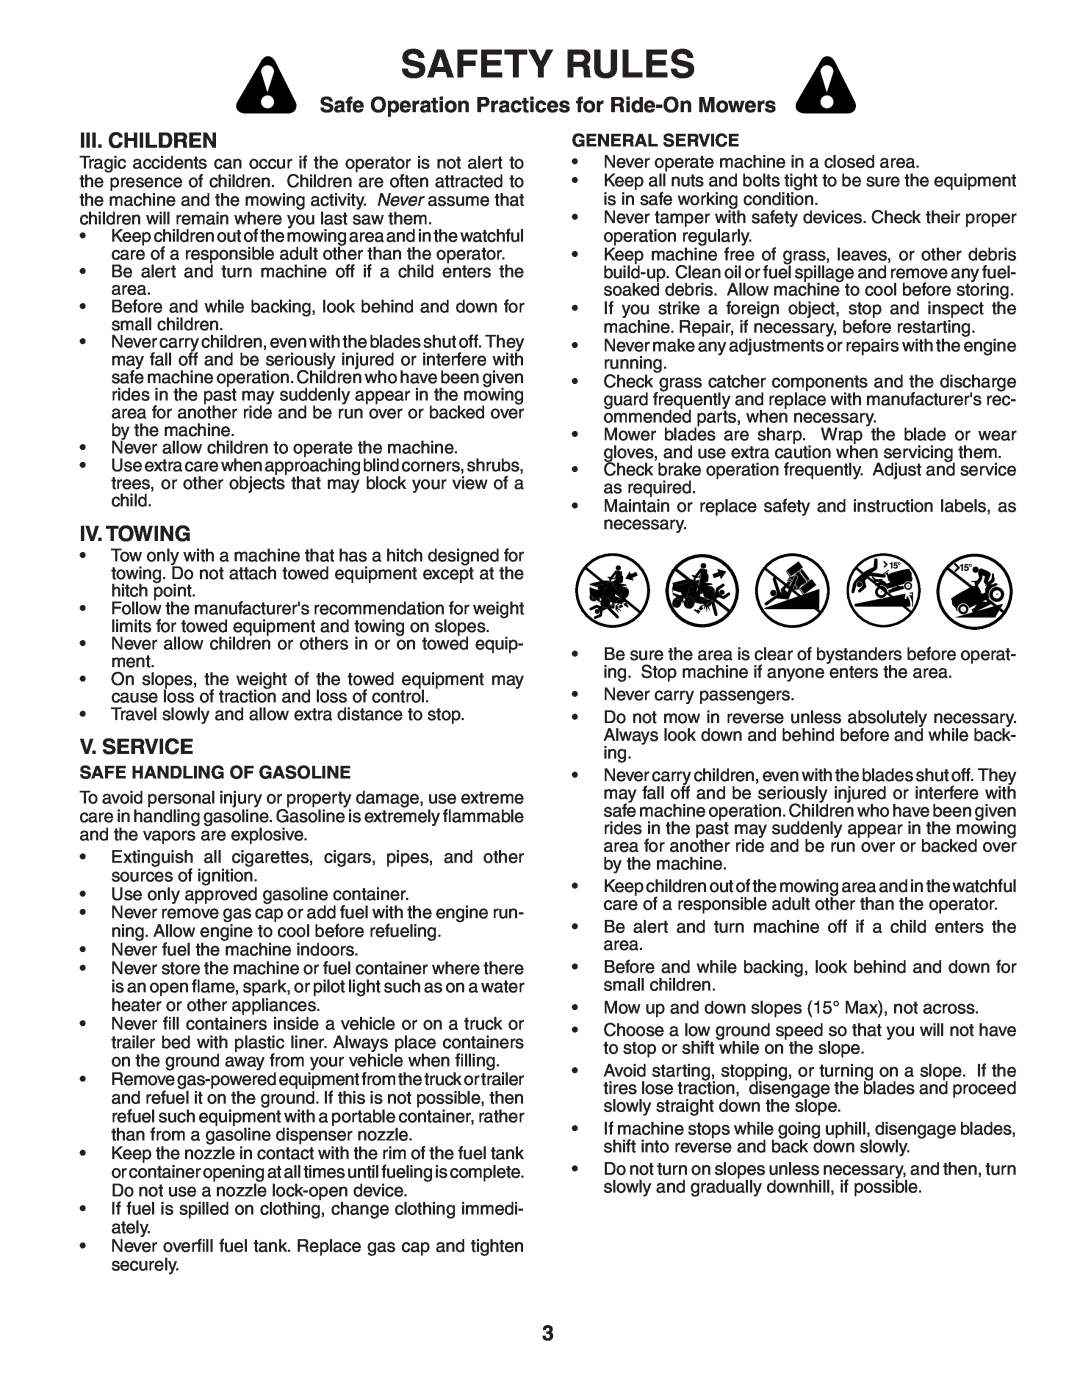 Poulan C20H42YT manual Iii. Children, Iv. Towing, V. Service, Safety Rules, Safe Operation Practices for Ride-OnMowers 